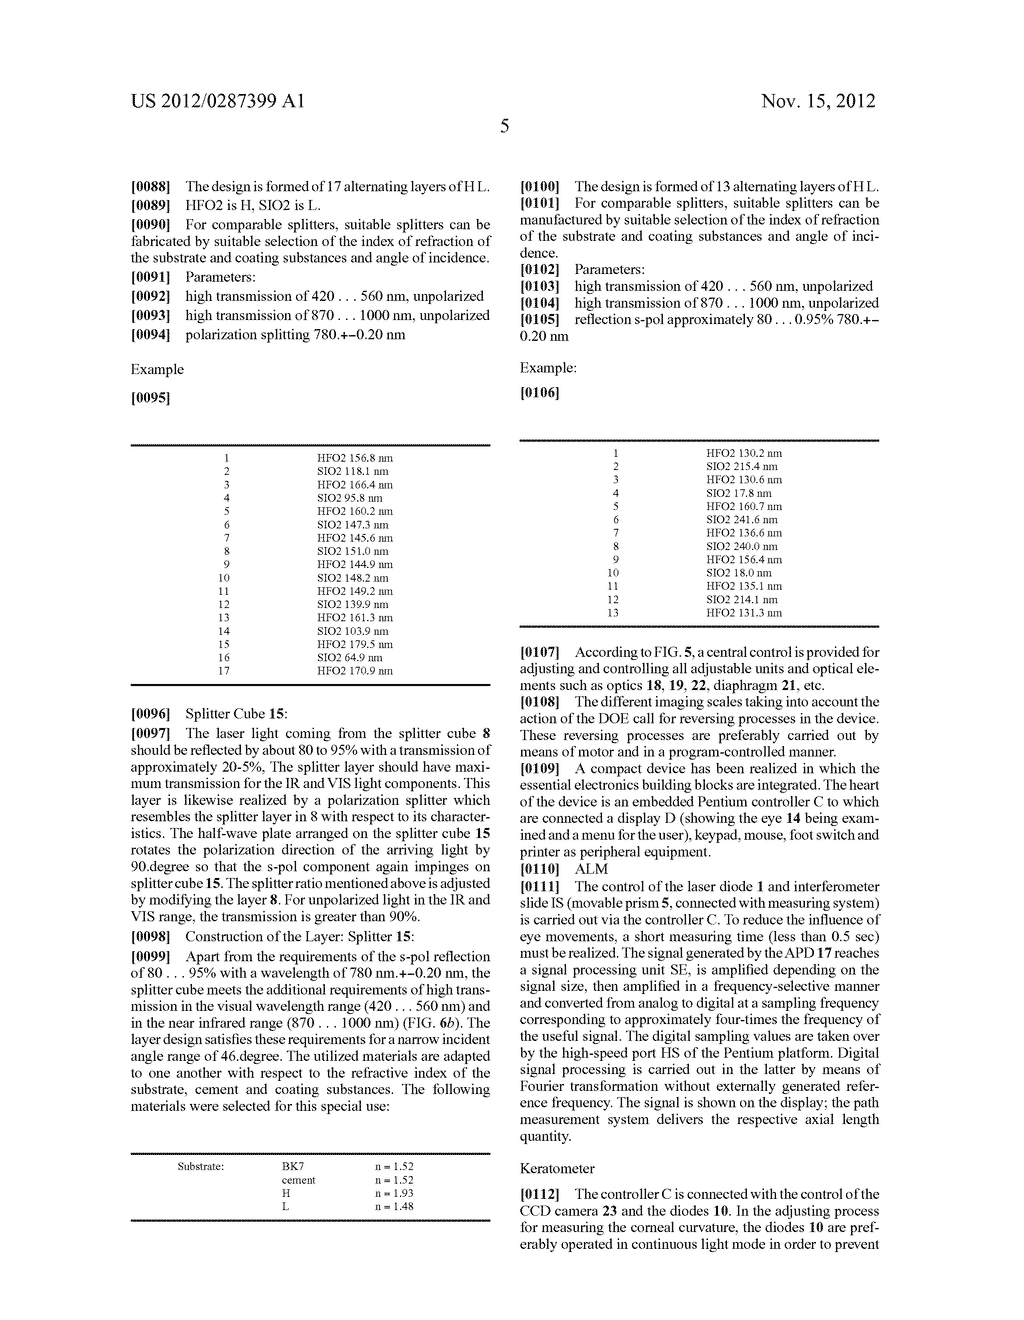 SYSTEM AND METHOD FOR THE NON-CONTACTING MEASUREMENTS OF THE EYE - diagram, schematic, and image 15